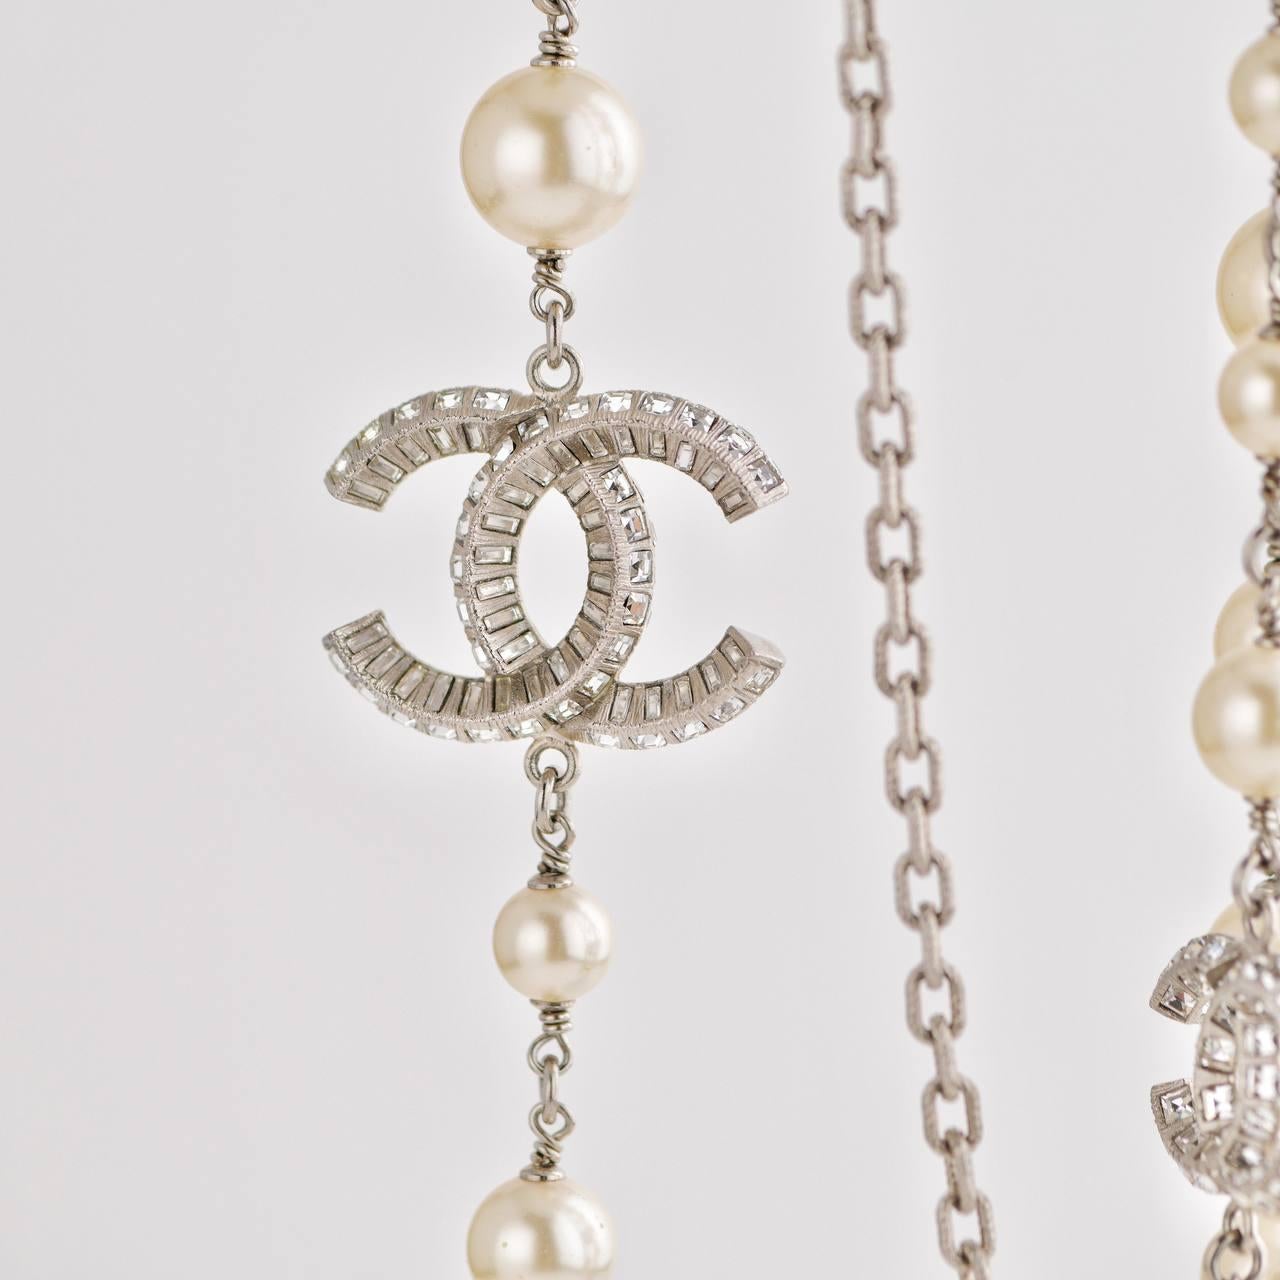 Baguette Cut Chanel 3 CC White Pearl and Crystal Long Necklace